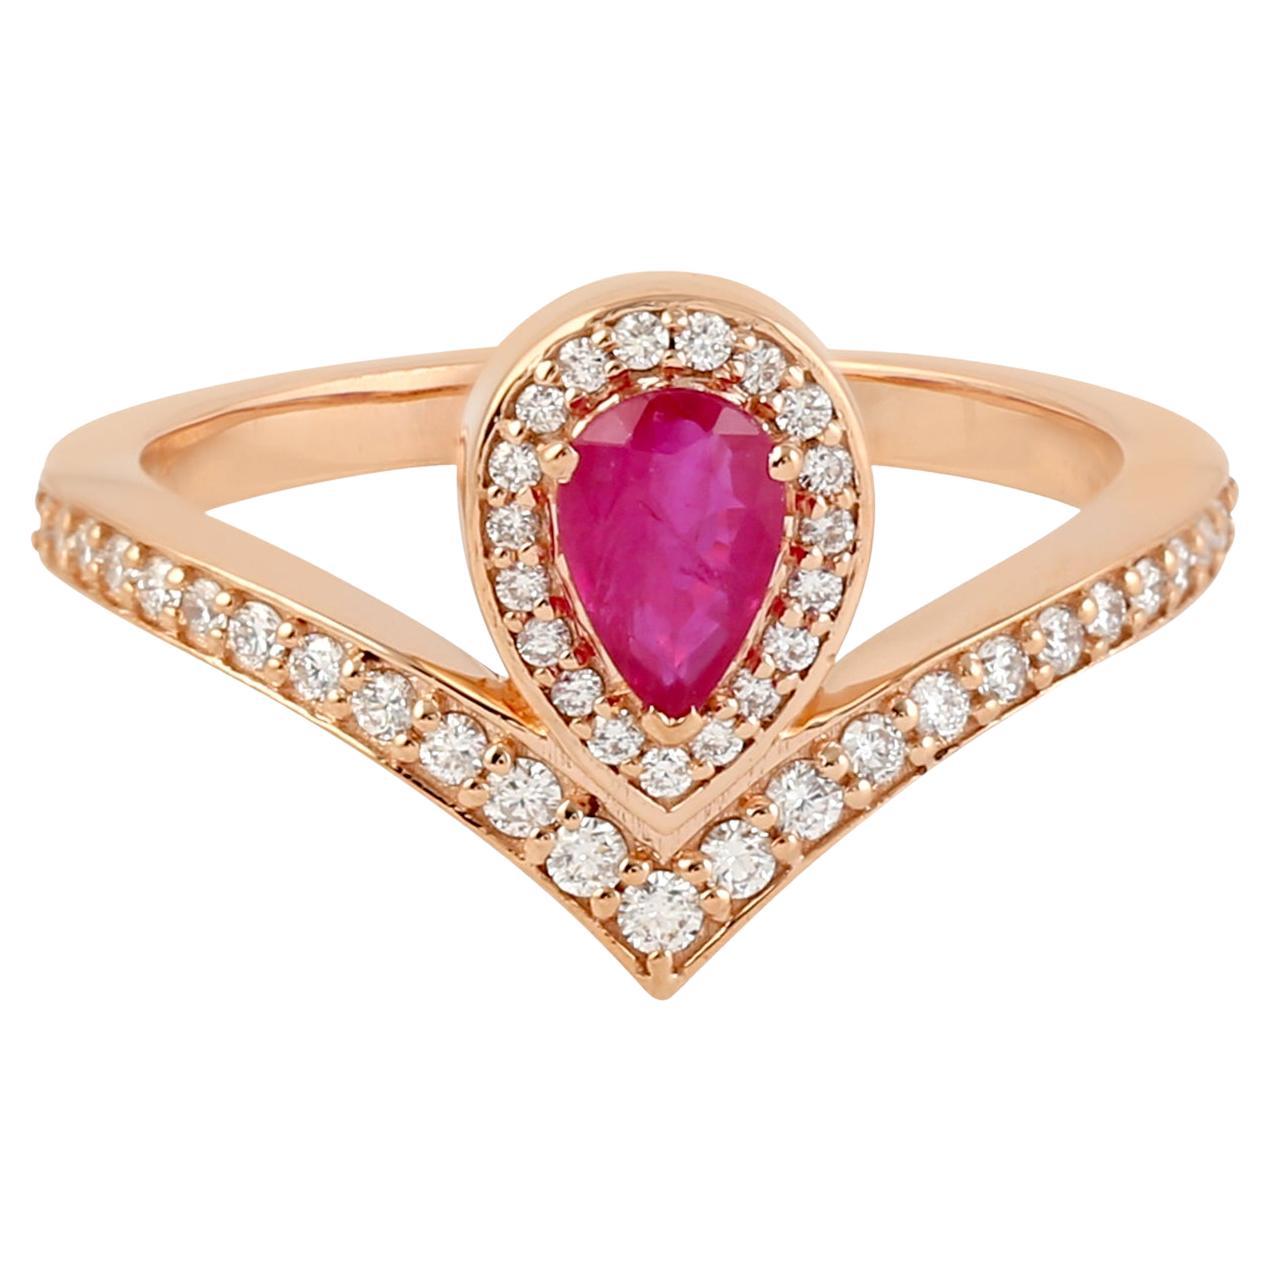 Pear Shaped Ruby Ring Accented With Diamonds Made In 18k Rose Gold